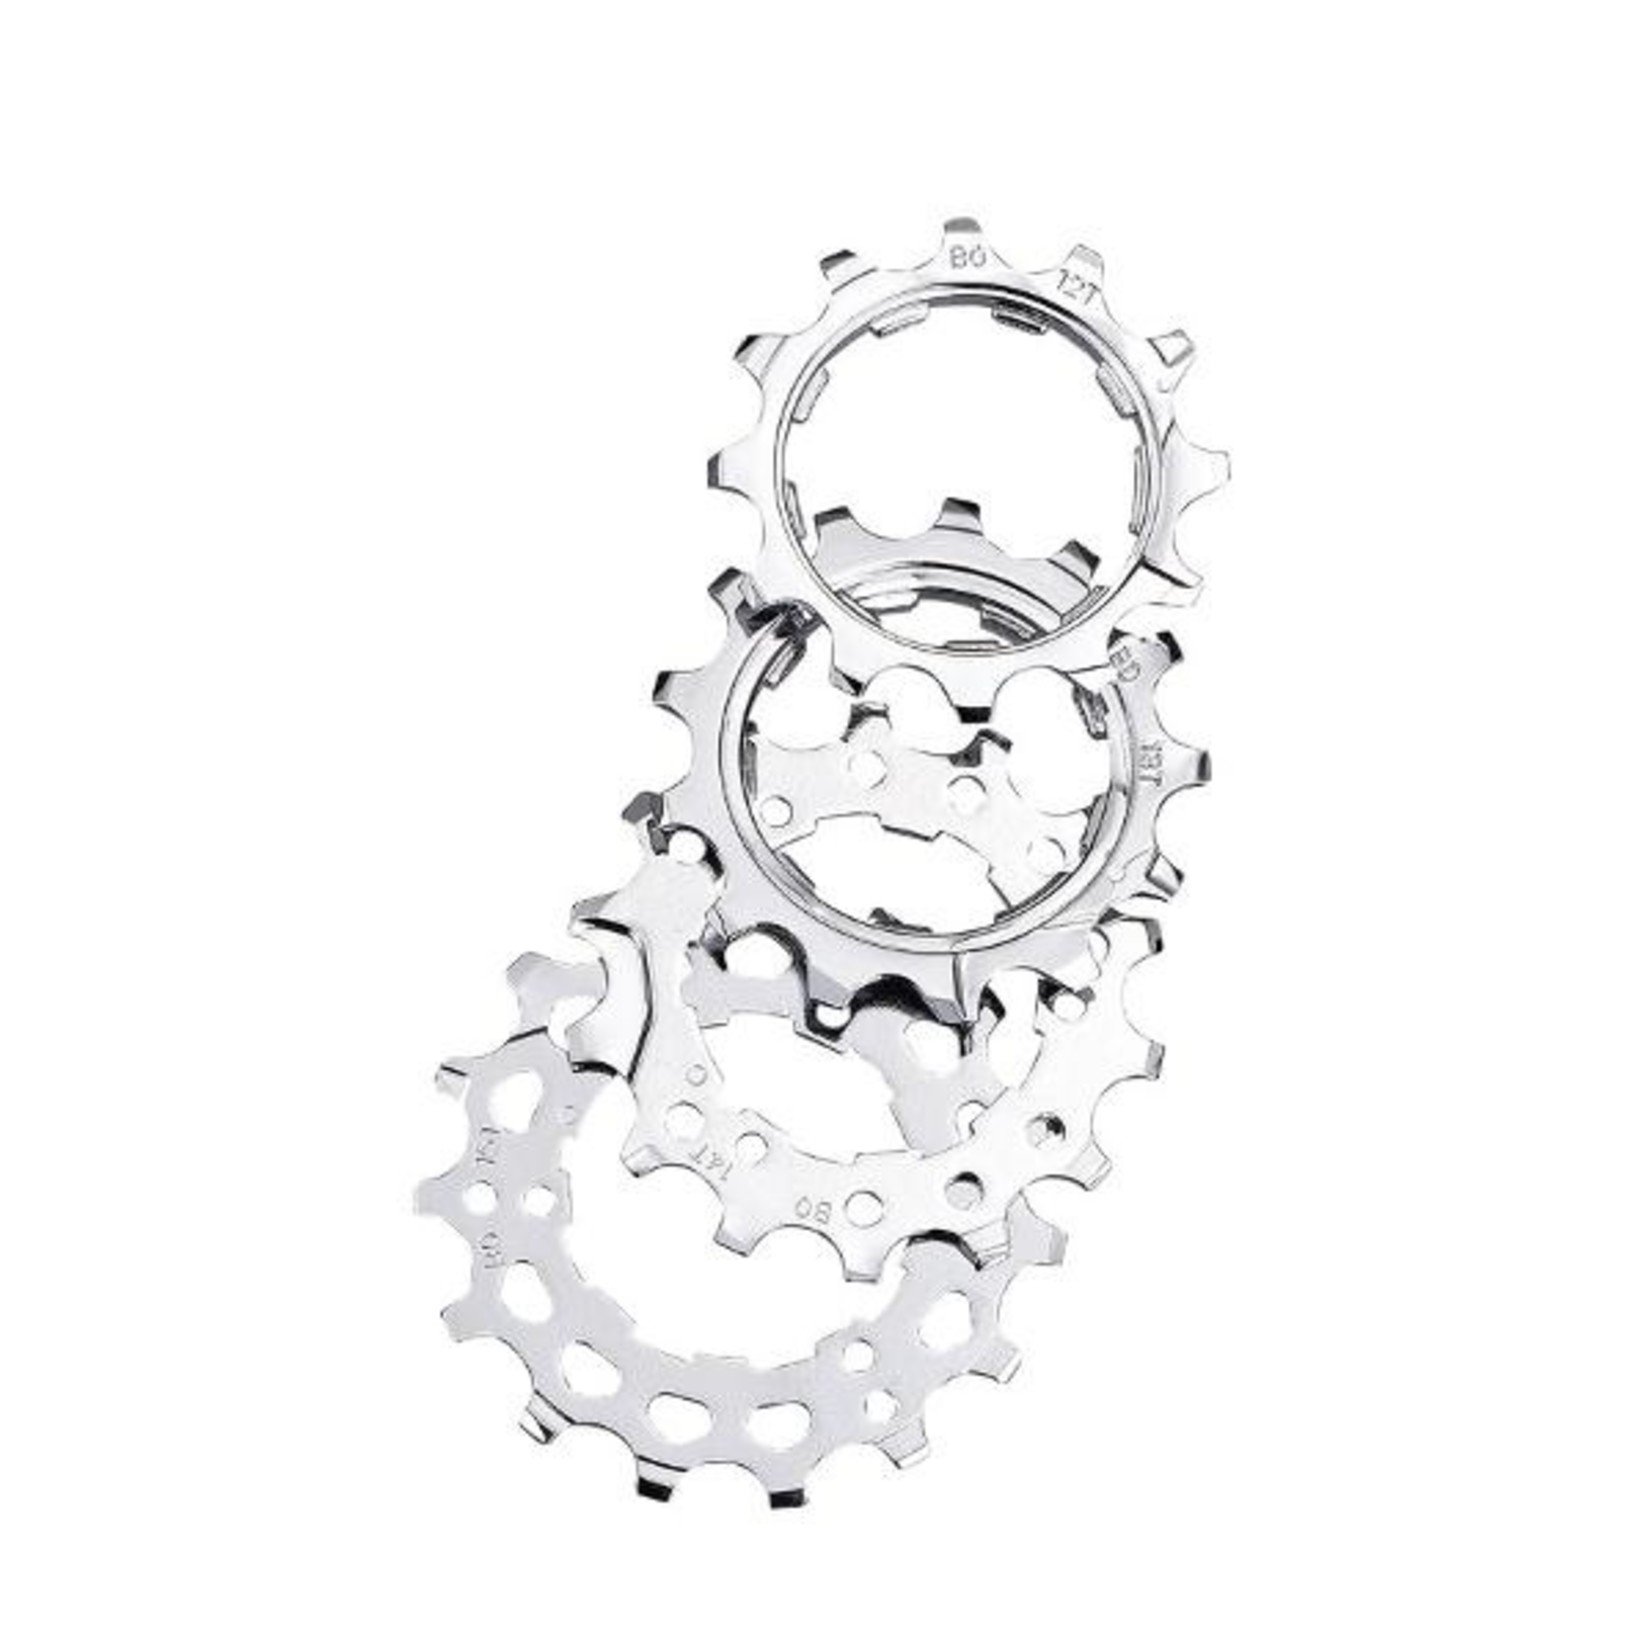 Microshift Microshift Bicycle Cassette - 10 Speed - 11-28T - Chrome Plated